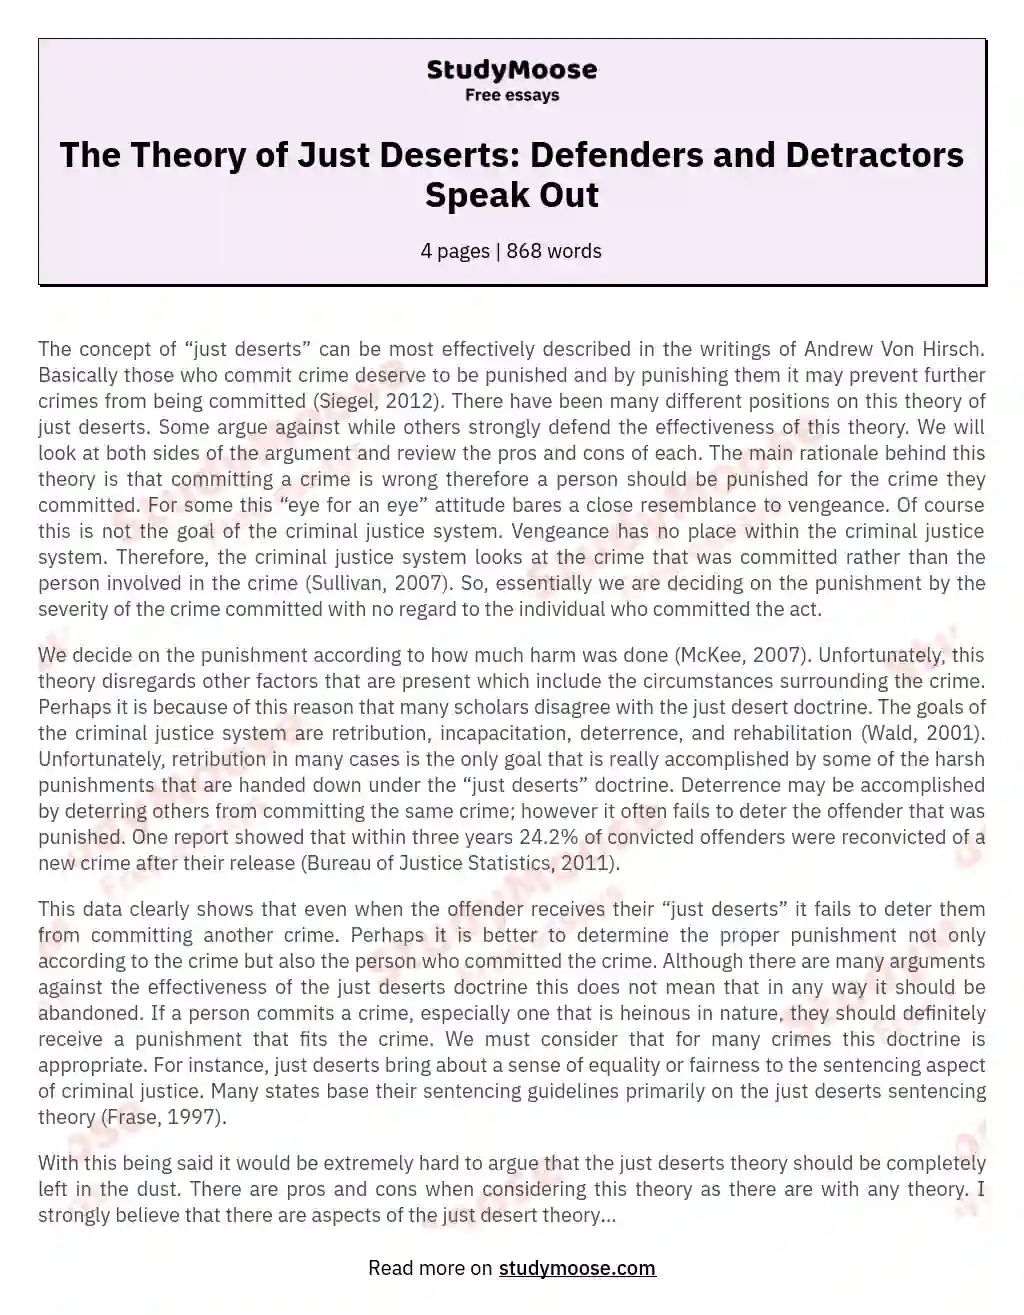 The Theory of Just Deserts: Defenders and Detractors Speak Out essay